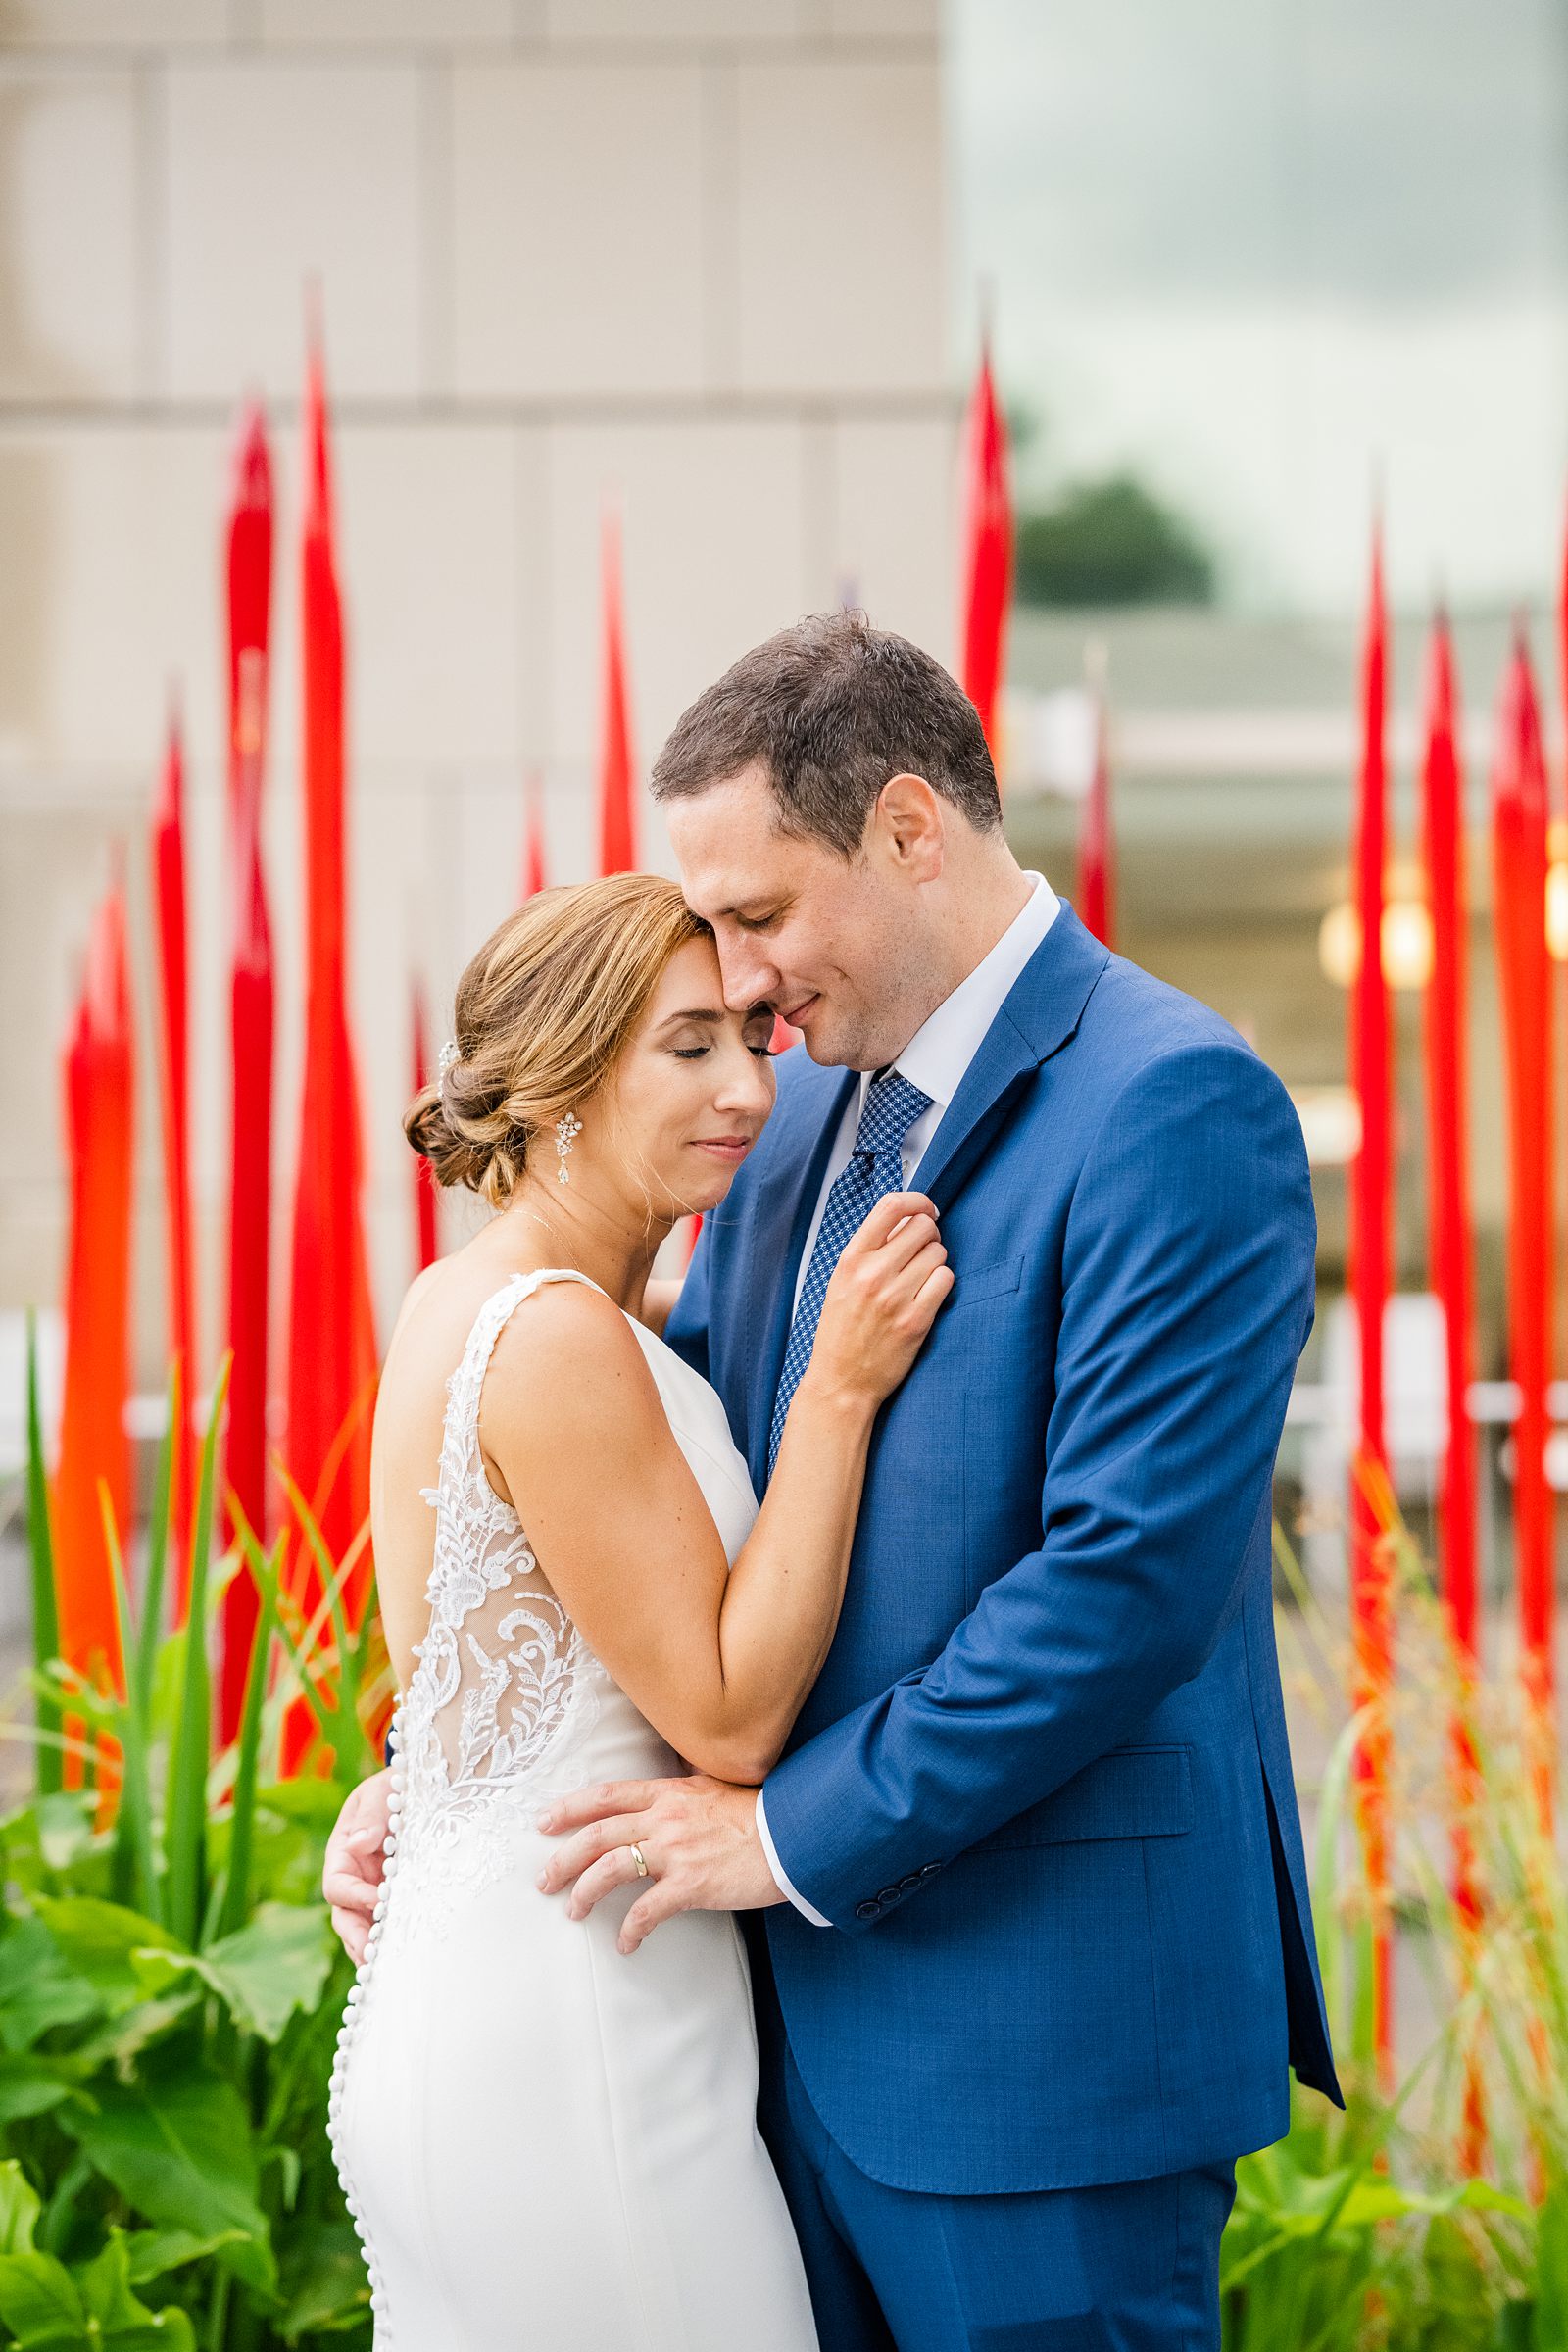 Bride and Groom Portraits at Summer VMFA Wedding by richmond wedding photographer Kailey Brianne Photography  